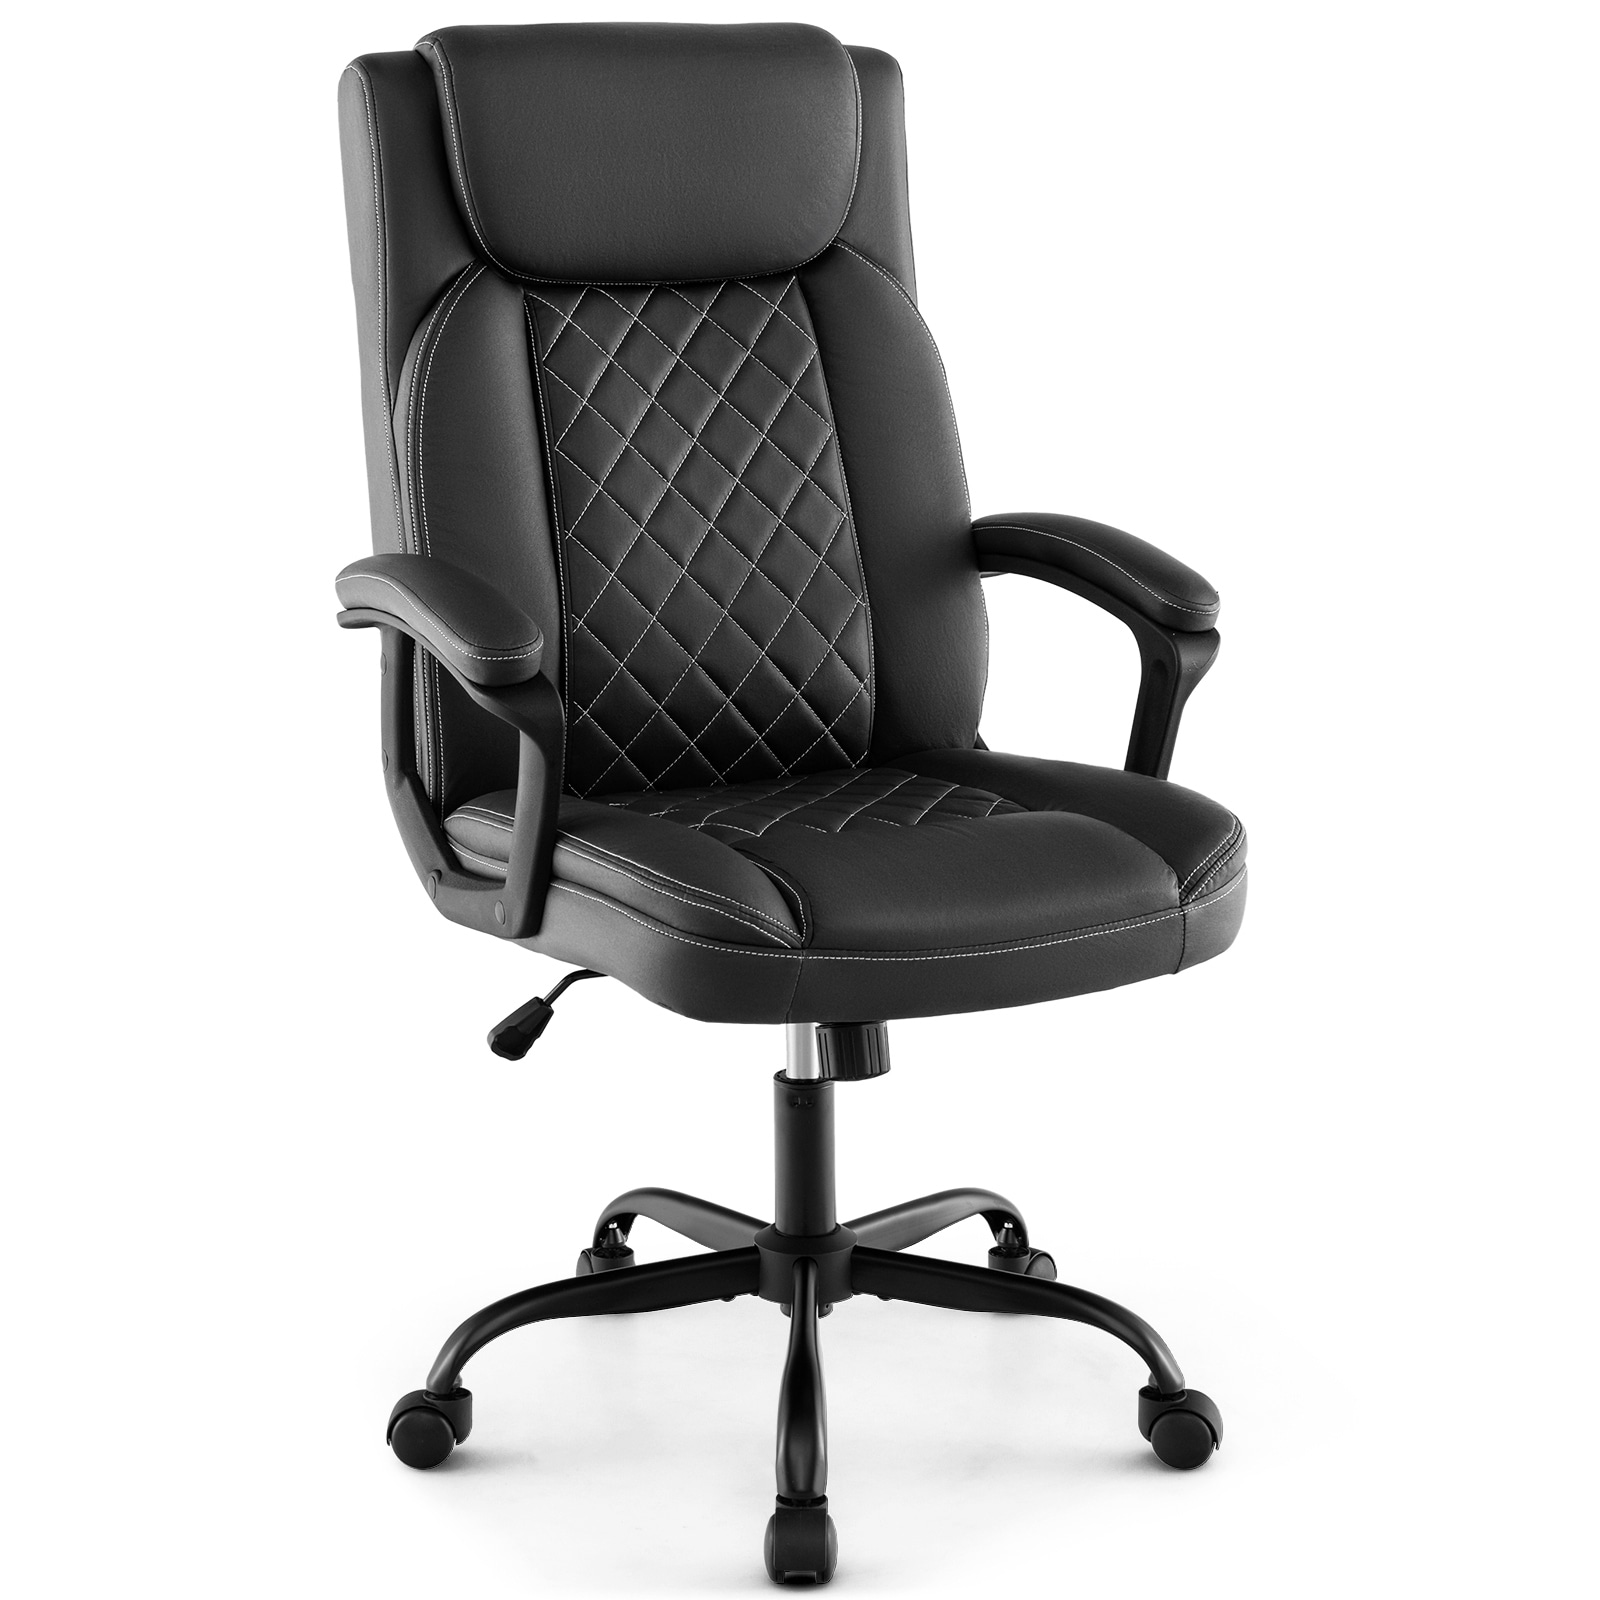 https://ak1.ostkcdn.com/images/products/is/images/direct/c32ad2e74341f22df409bbb8bc9592424ab7e521/Costway-Adjustable-Office-Desk-Chair-Ergonomic-Executive-Chair-with.jpg